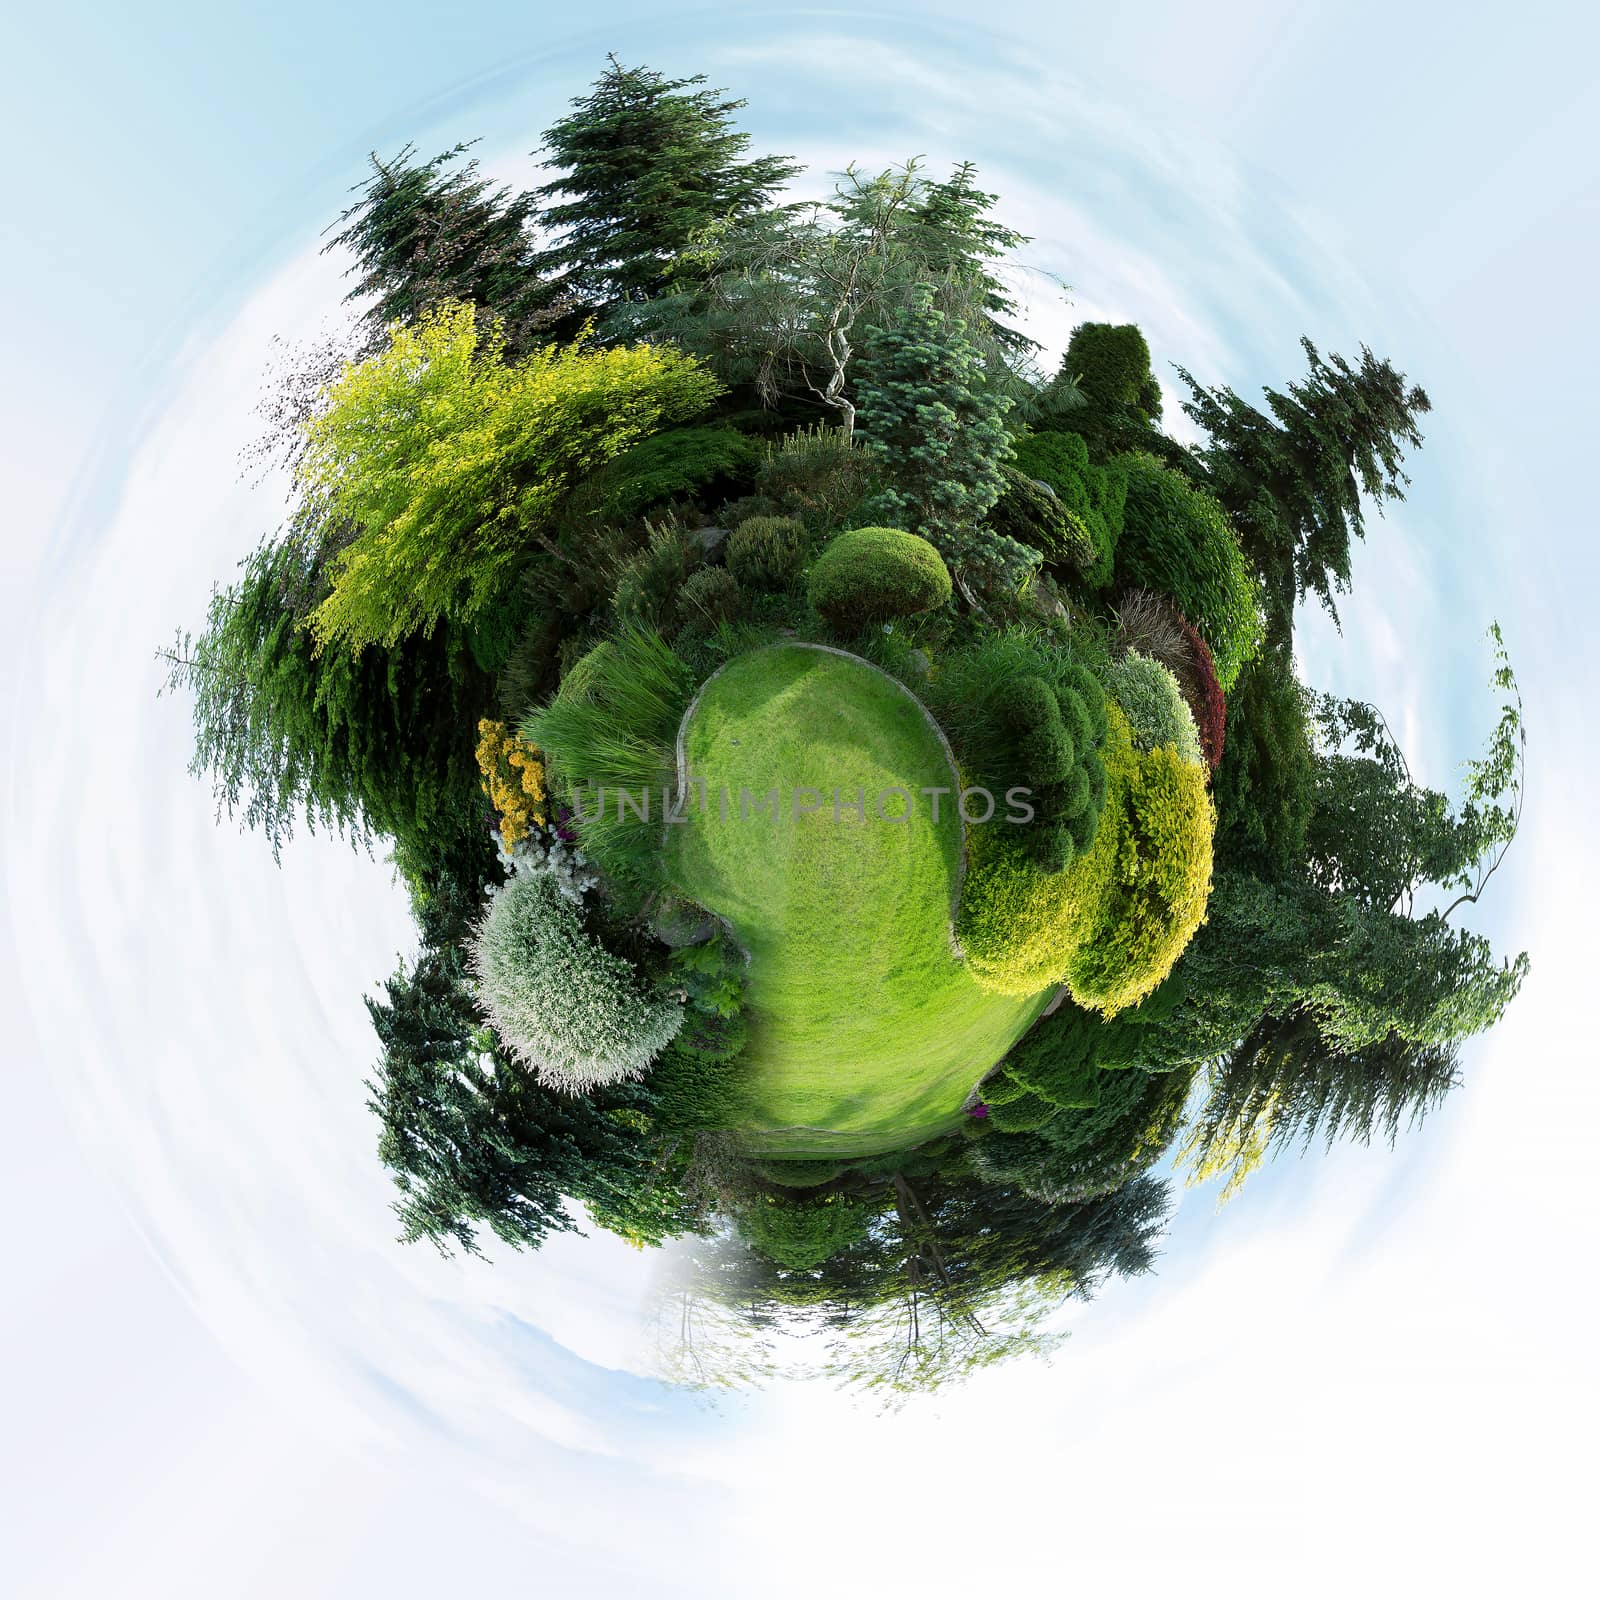 mini planet of Beautiful spring garden design, with conifer trees, green grass. Beautiful Little planet with spring garden, ecology concept. Tiny green planet with trees